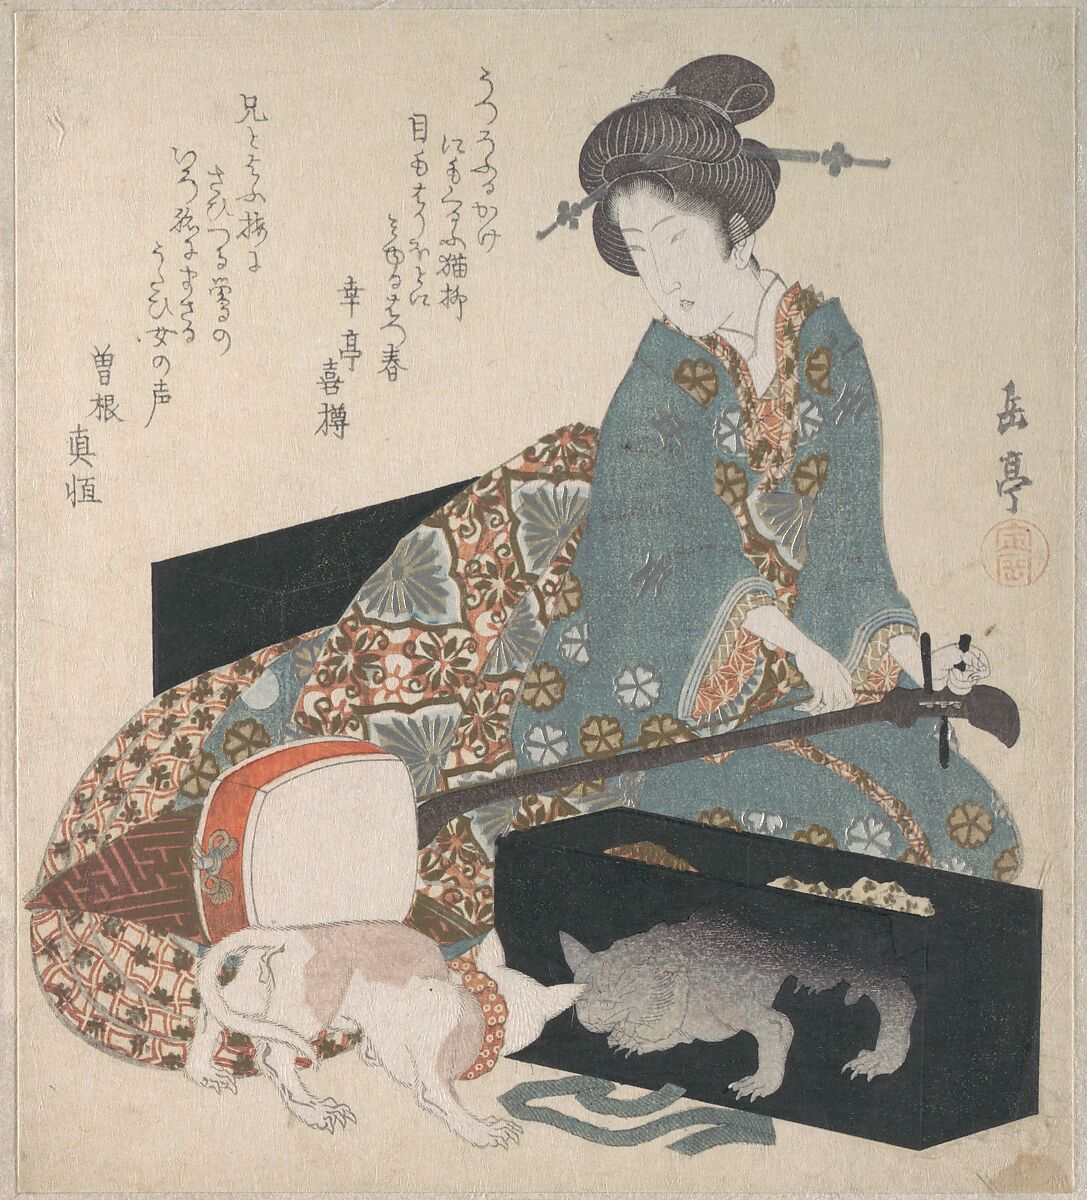 Woman Tuning a Shamisen and a Cat Looking at its Own Reflection, Yashima Gakutei (Japanese, 1786?–1868), Part of an album of woodblock prints (surimono); ink and color on paper, Japan 